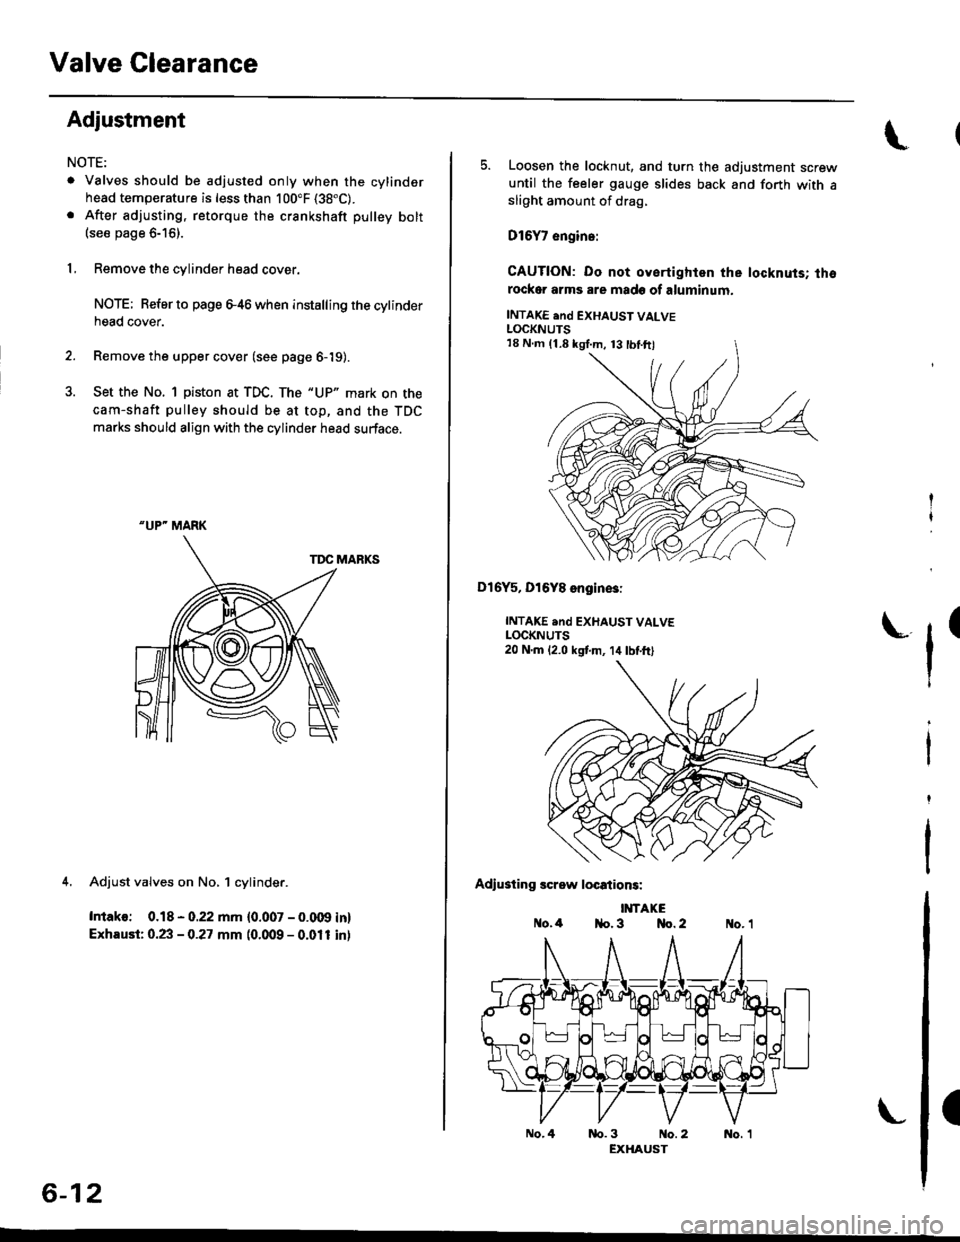 HONDA CIVIC 2000 6.G Workshop Manual Valve Clearance
Adjustment
NOTE:
. Valves should be adjusted only when the cylindsrhead temperature is less than 100"F (38"C).
. After adjusting, retorque the crankshaft pulley bolt(see page 6-16).
1,